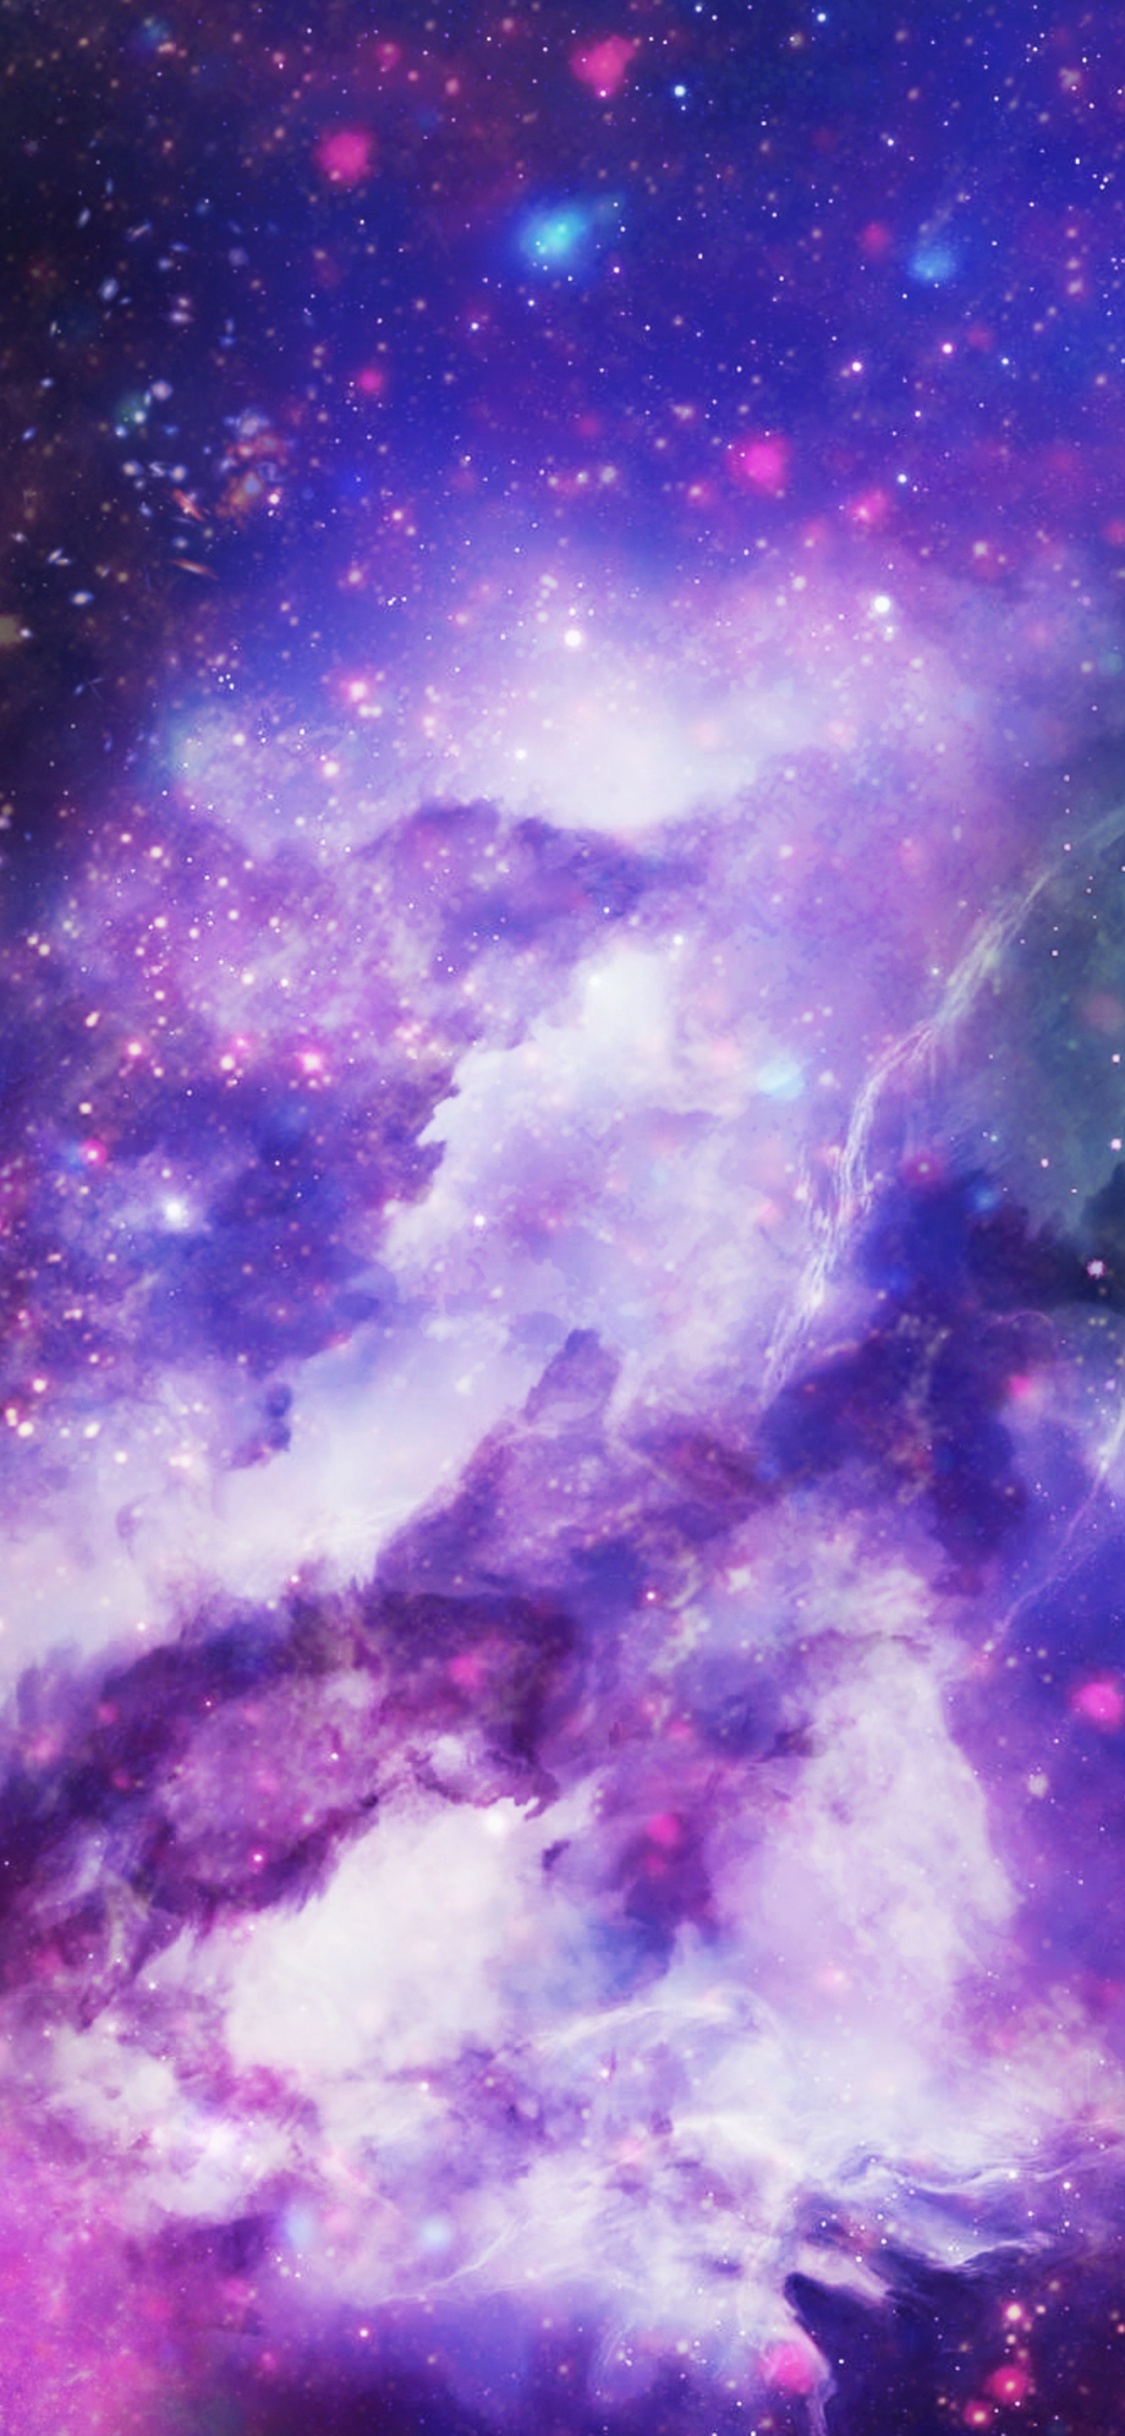 Purple and Blue Galaxy Illustration. Wallpaper in 1125x2436 Resolution